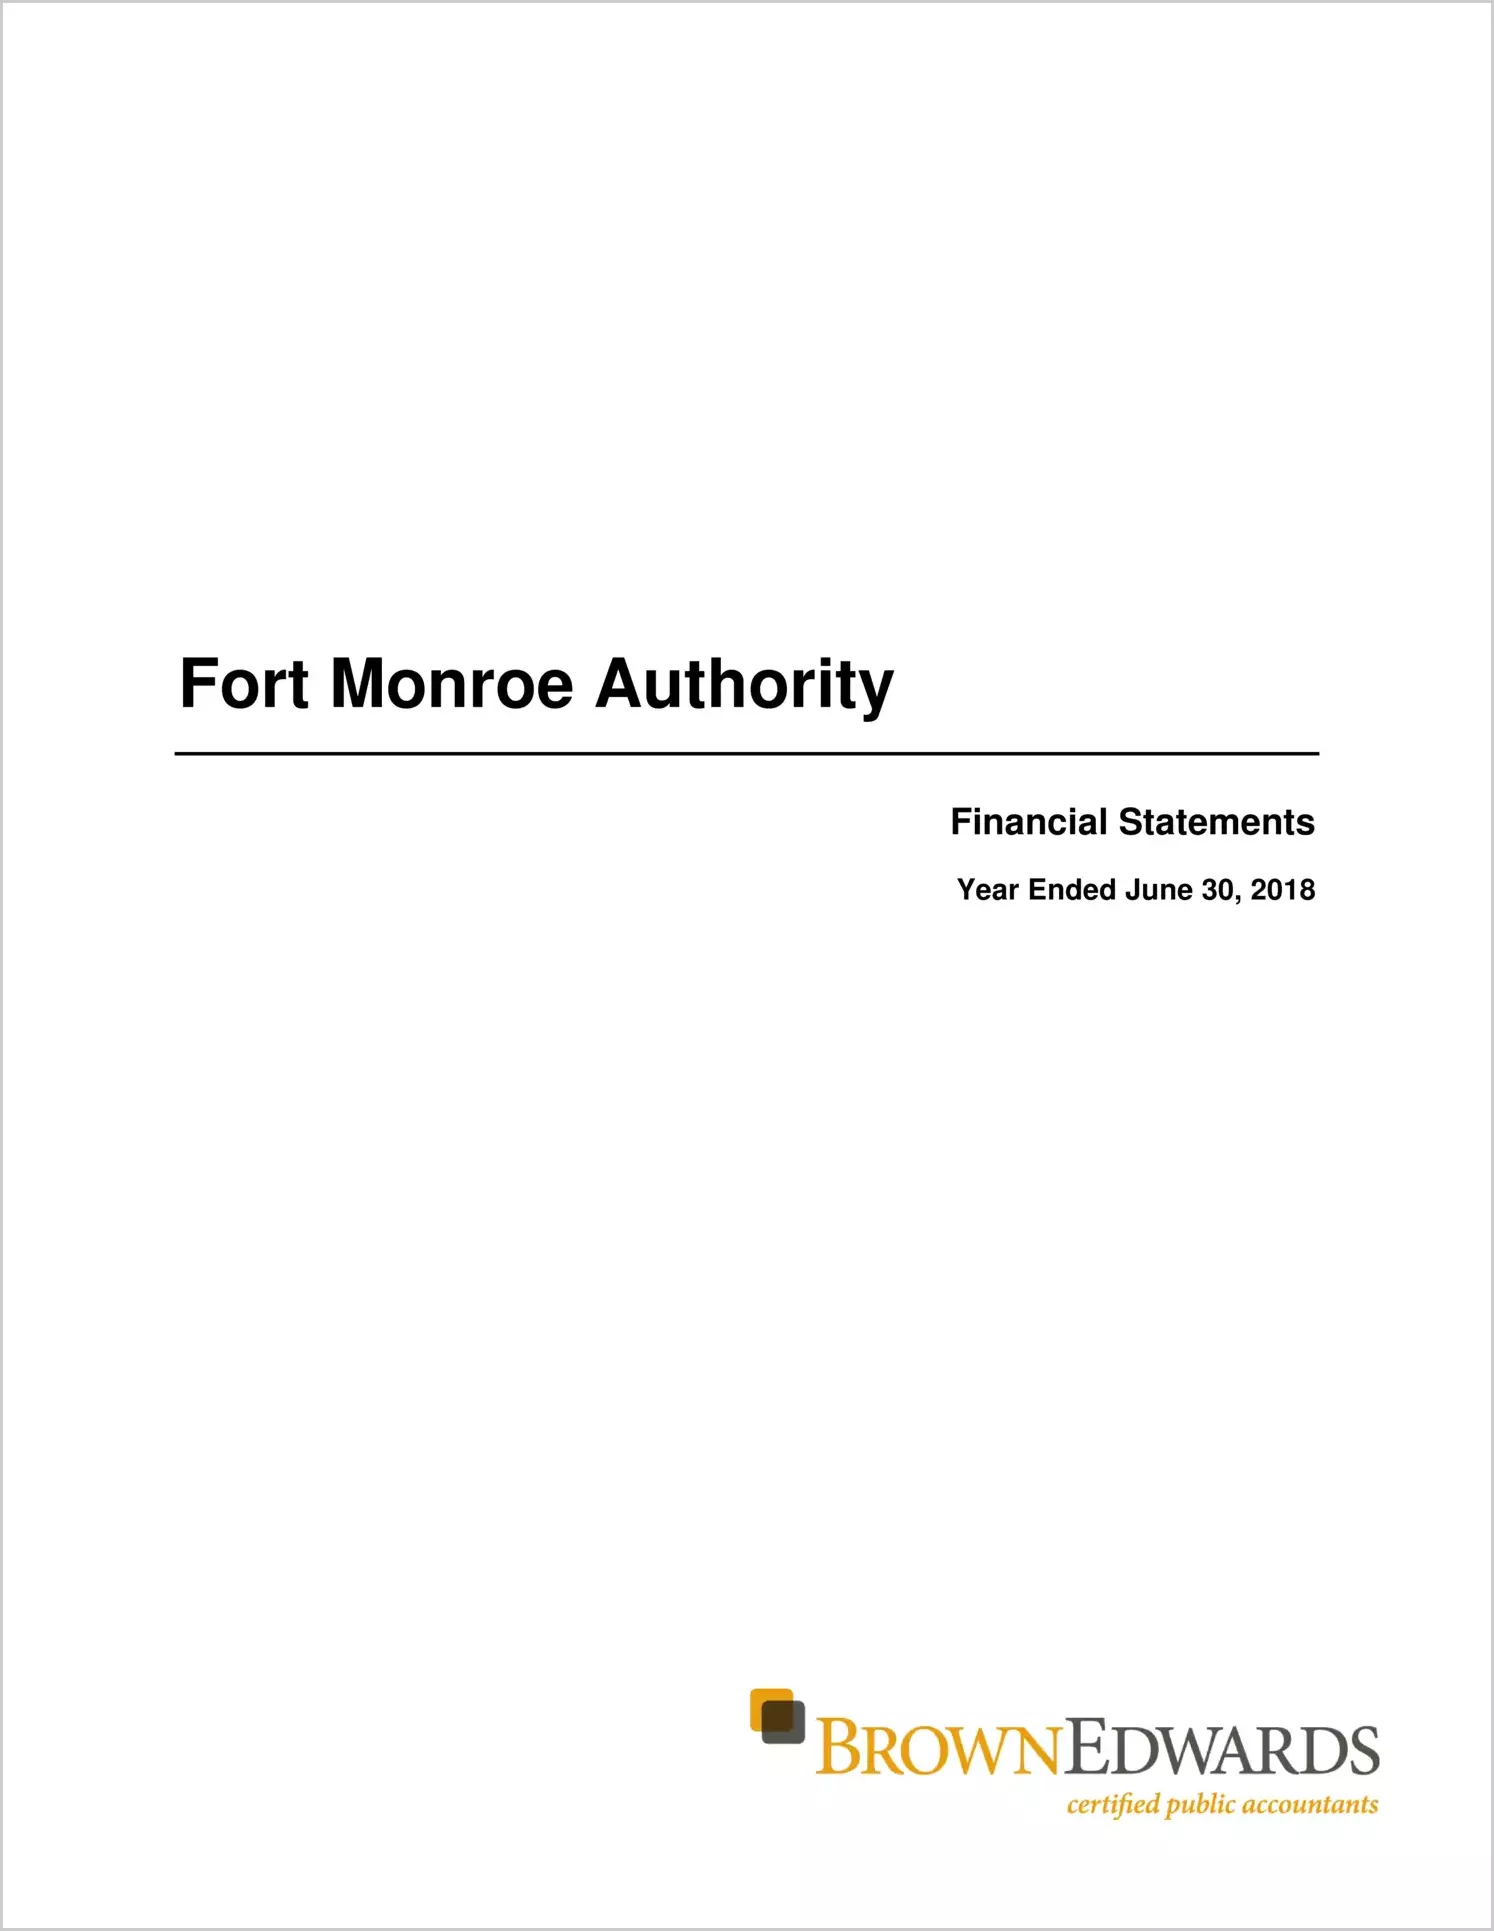 Fort Monroe Authority for the year ended June 30, 2018